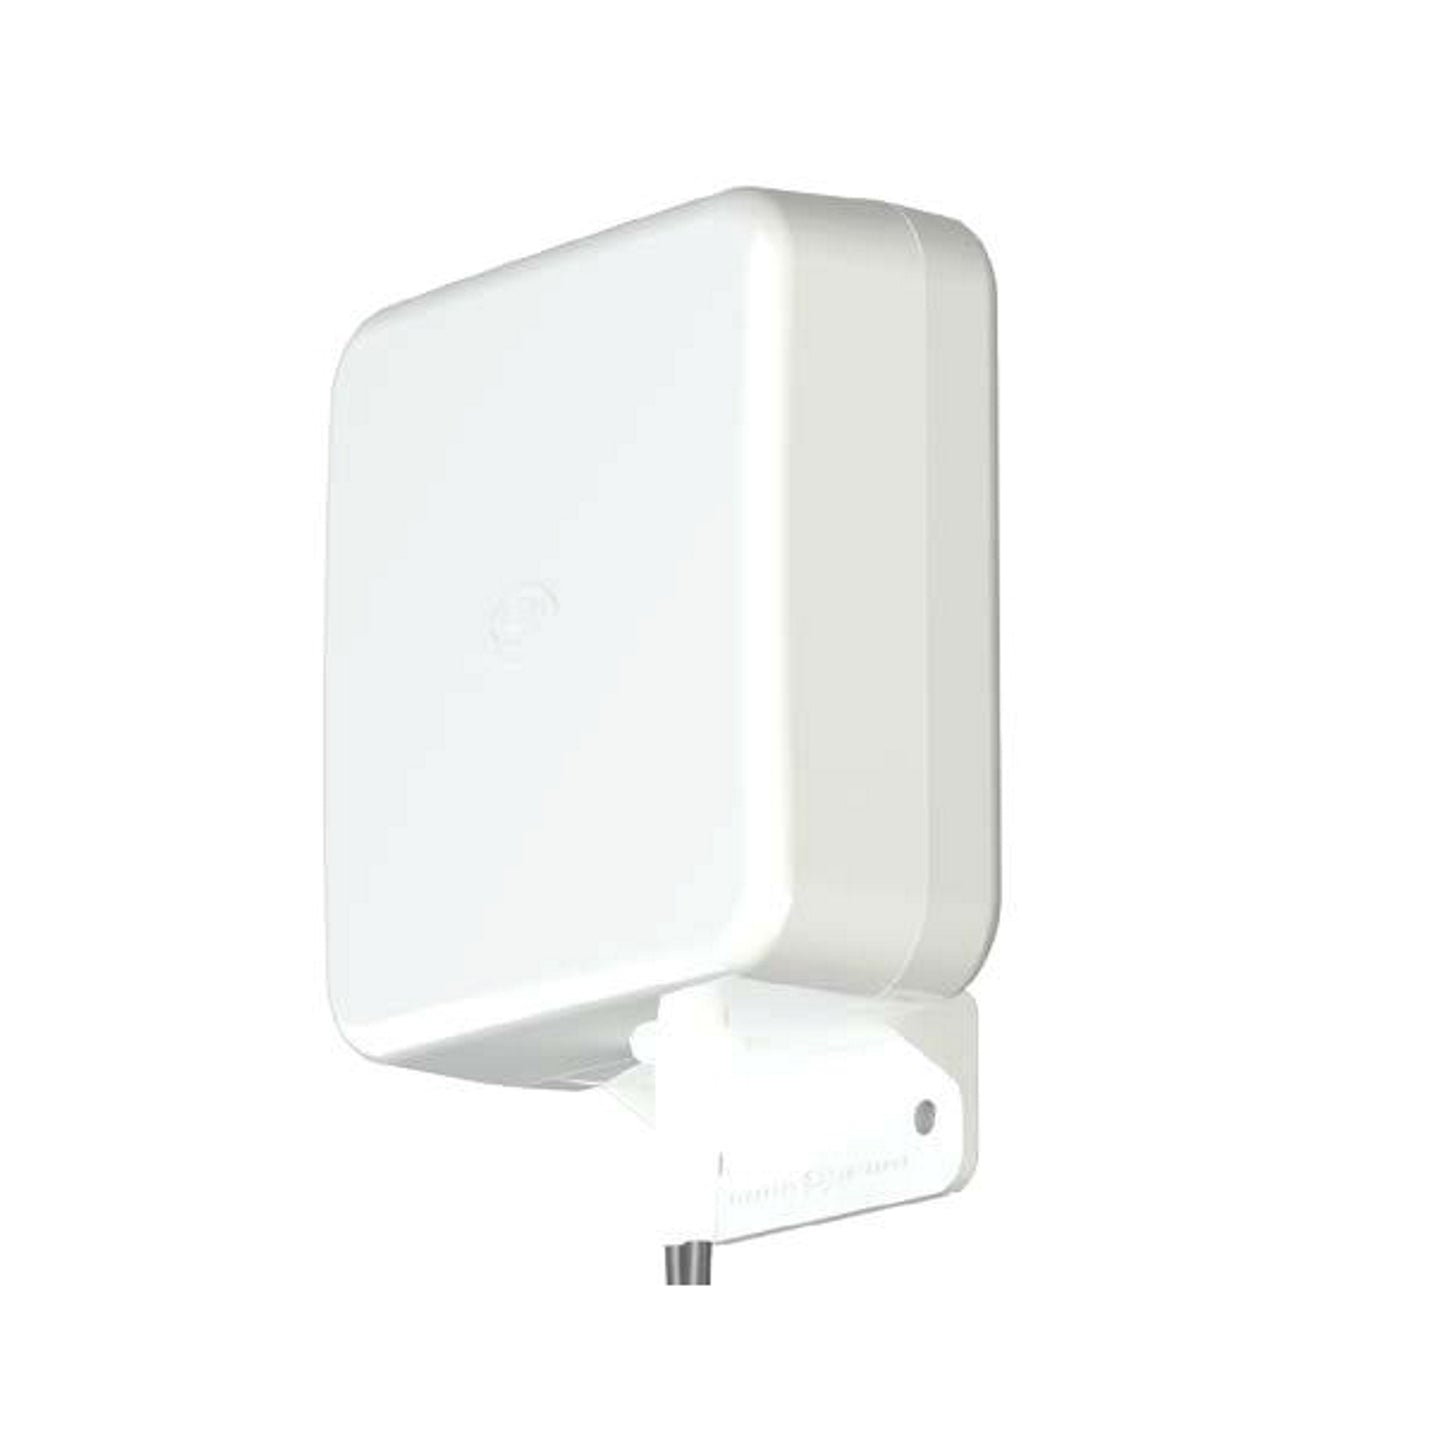 Antenne Wittenberg LTE Mimo, antenne directionnelle, différentes variantes